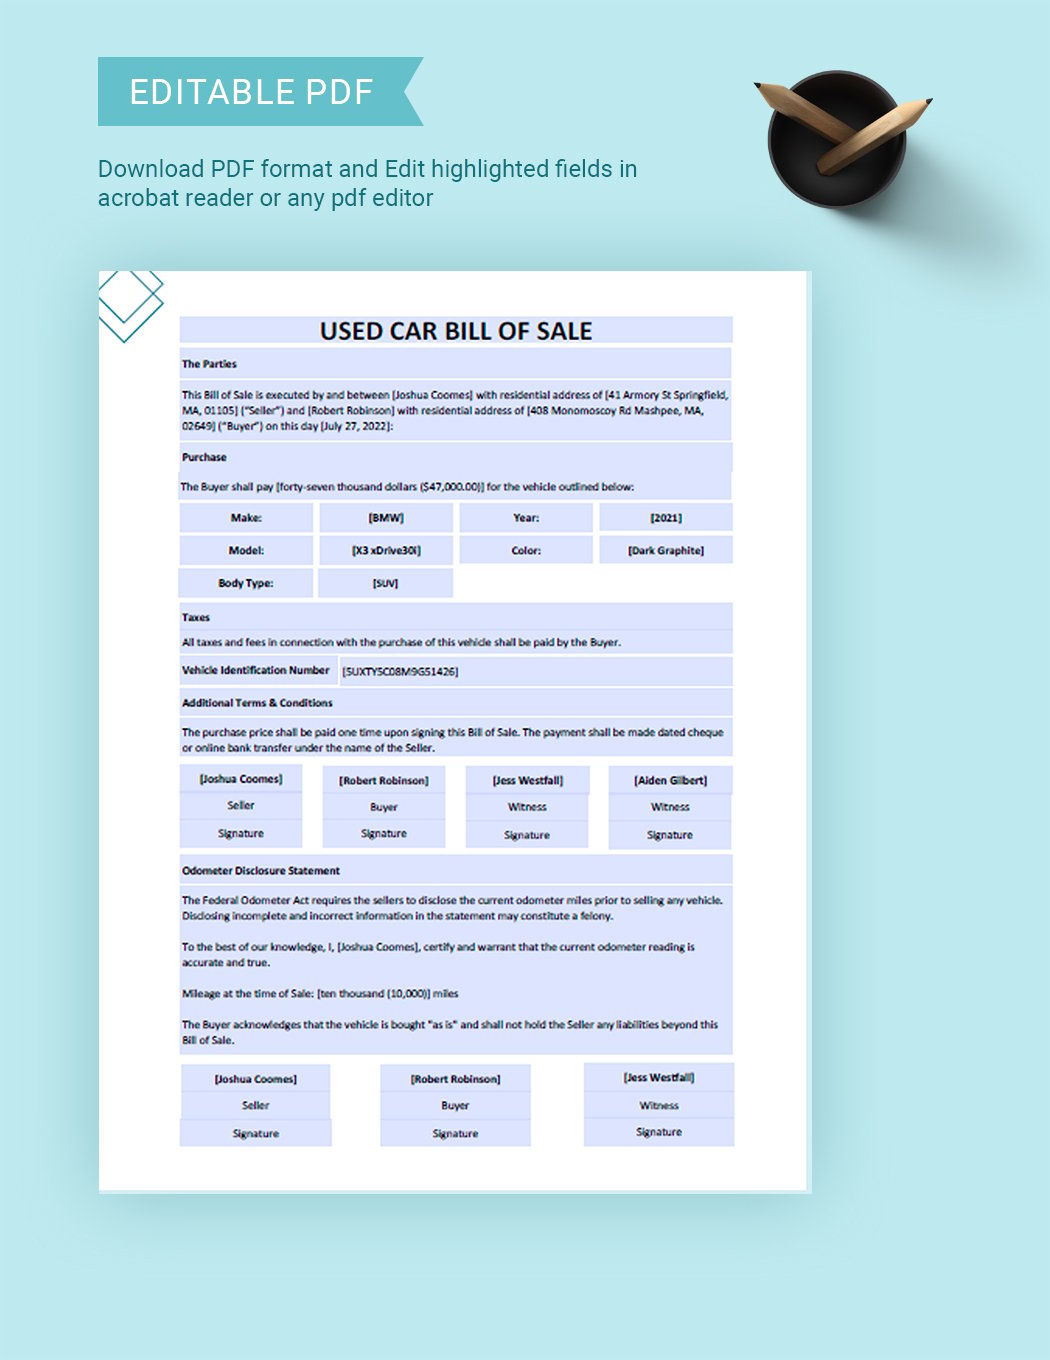 Used Car Bill of Sale Template